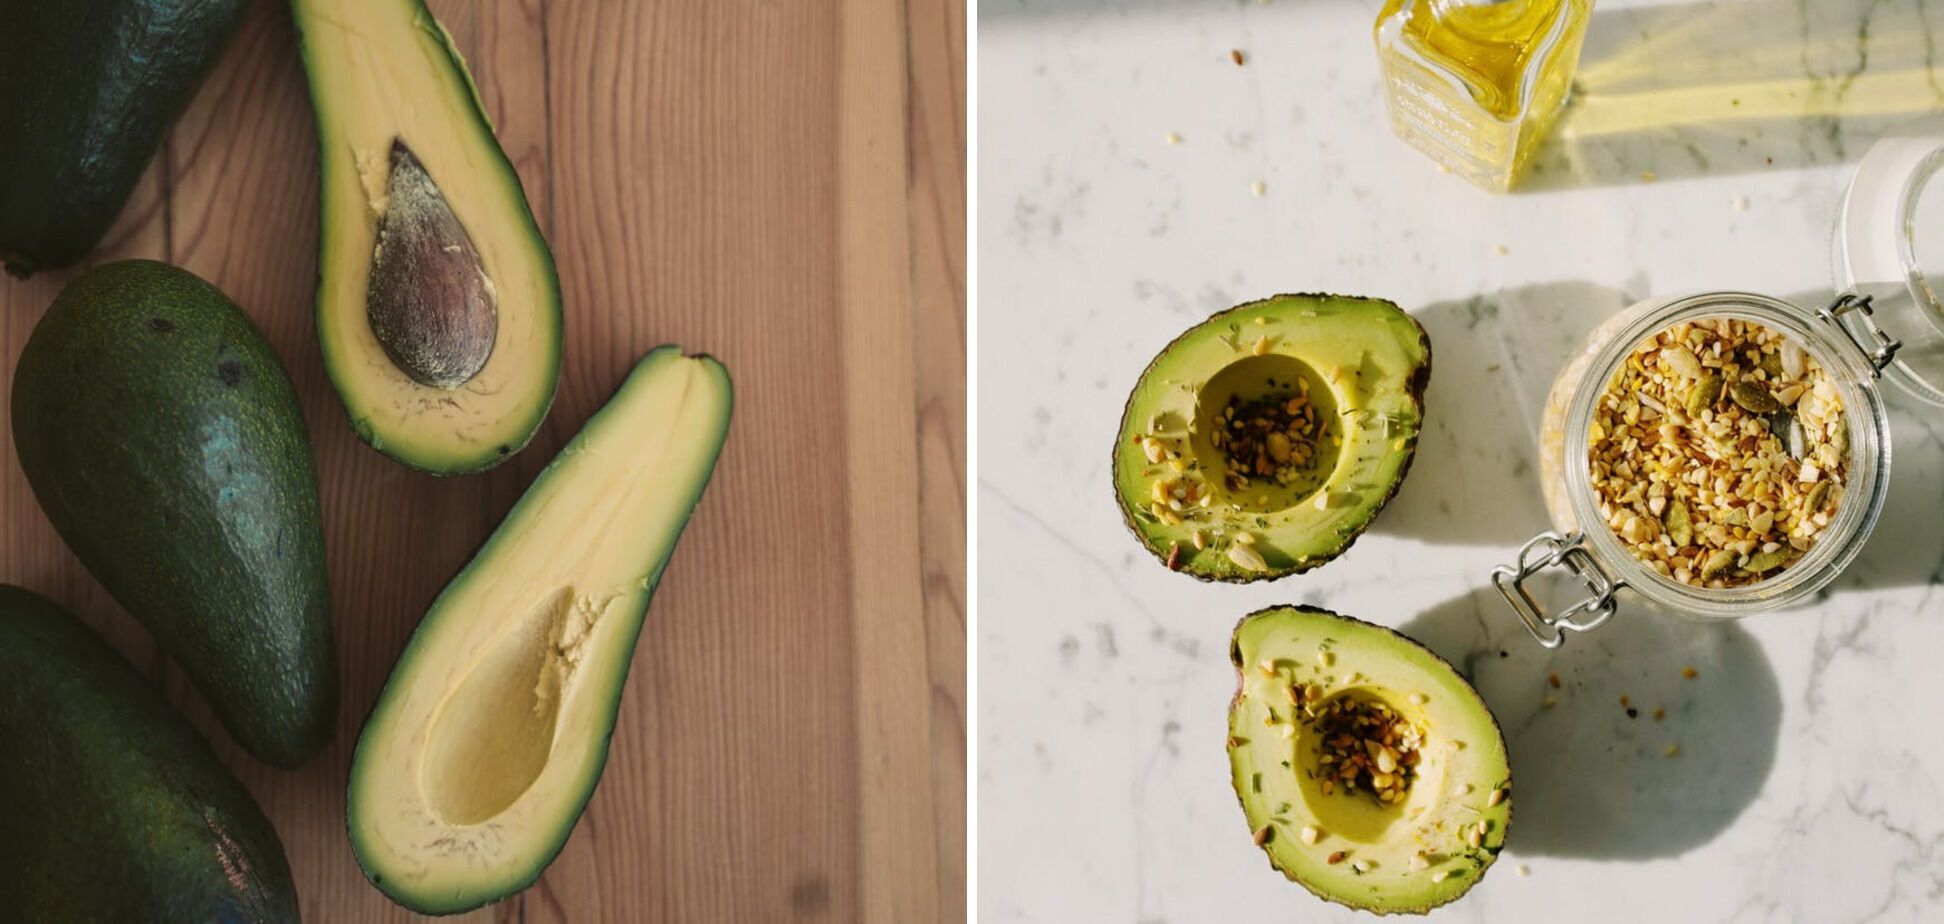 Avocado that goes perfectly with oatmeal